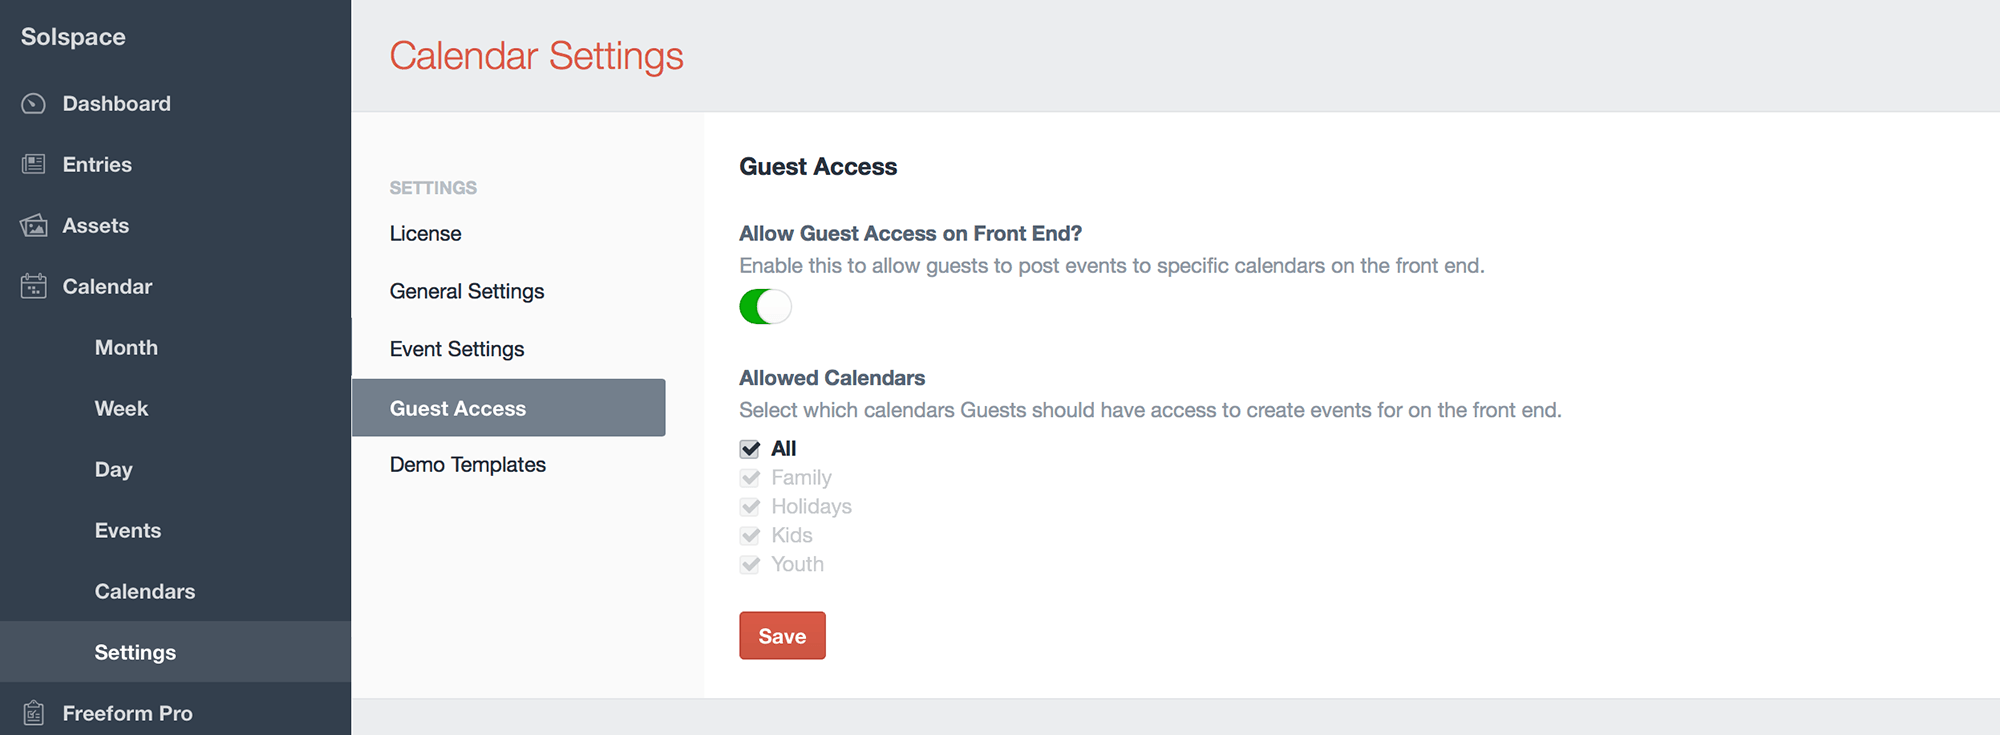 Guest Access Settings